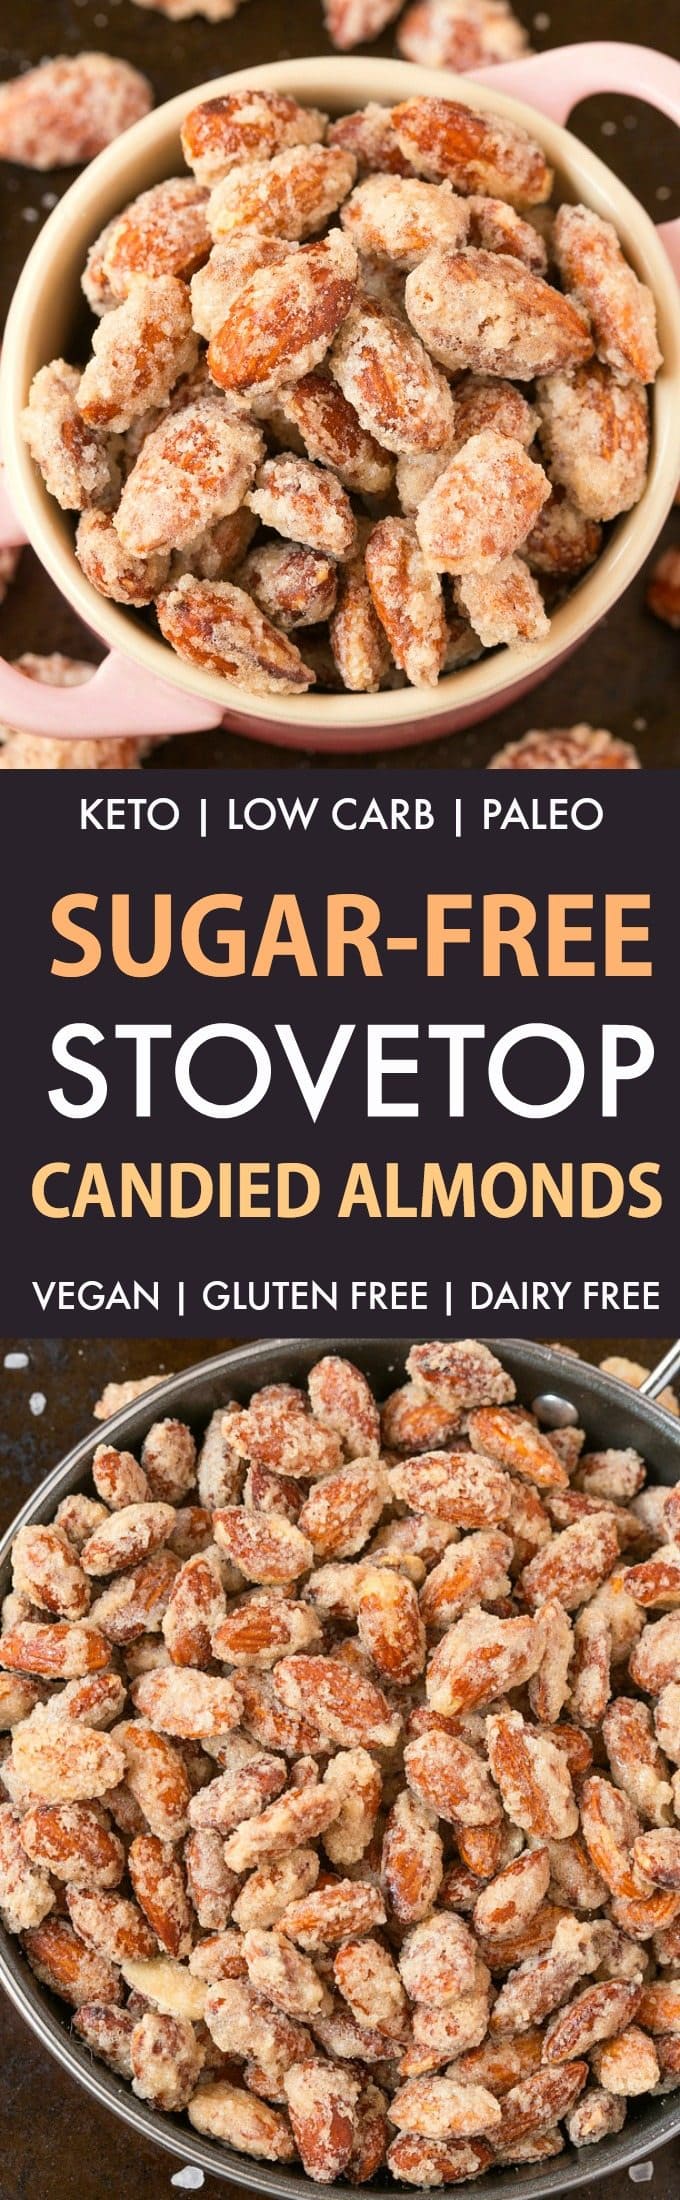 Easy Sugar-Free Candied Almonds (Keto, Low Carb, Paleo)- Stovetop made candied almonds made with zero sugar or oil- Perfect for holidays, gifts and every day guilt-free snacking! {vegan, gluten free, dairy free recipe}- #almonds #sugarfree #lowcarb #ketodessert | Recipe on thebigmansworld.com